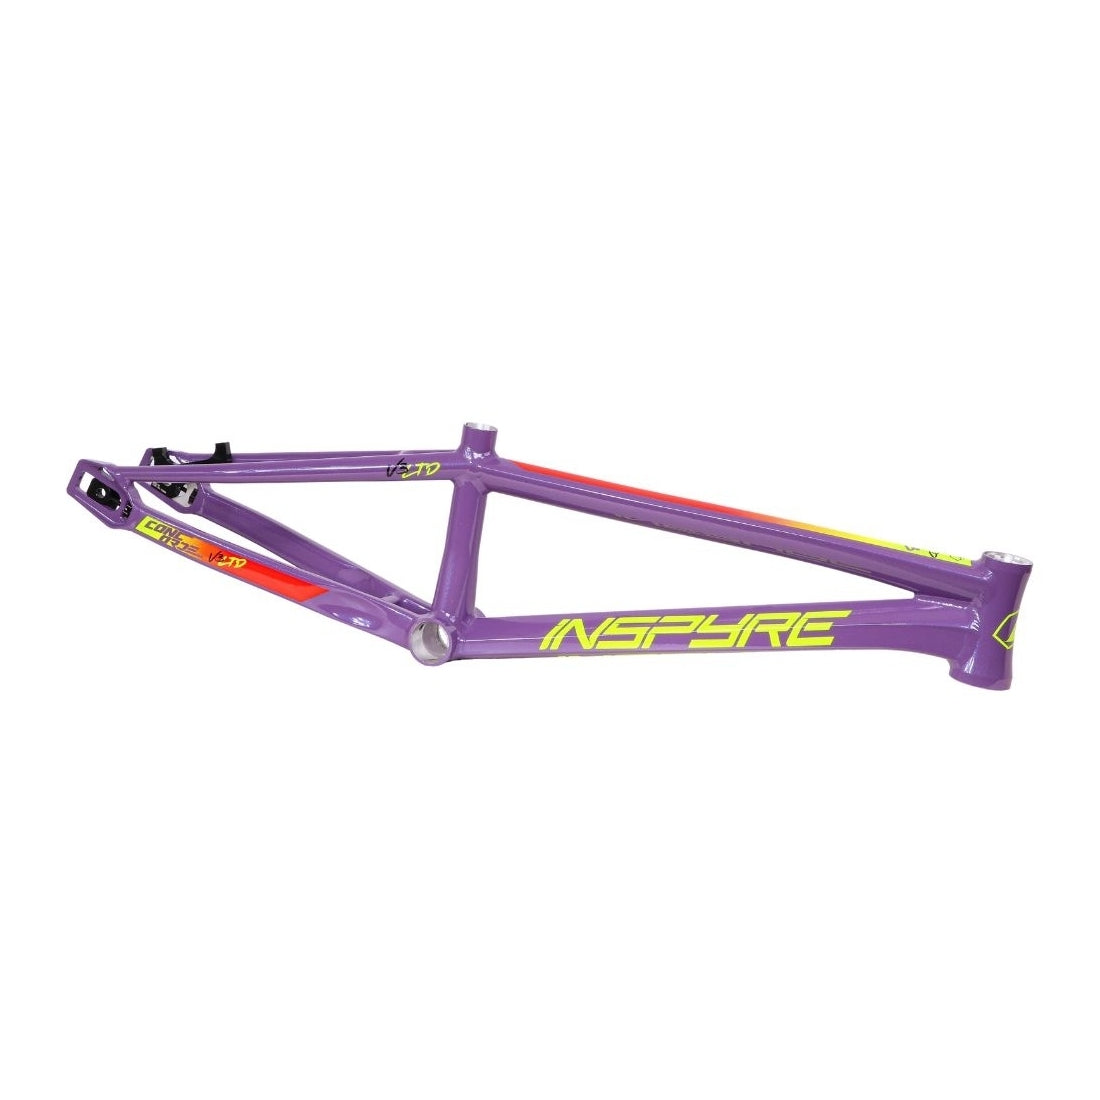 Inspyre Concorde V3 Expert Frame purple BMX race bike frame with decals on a white background.